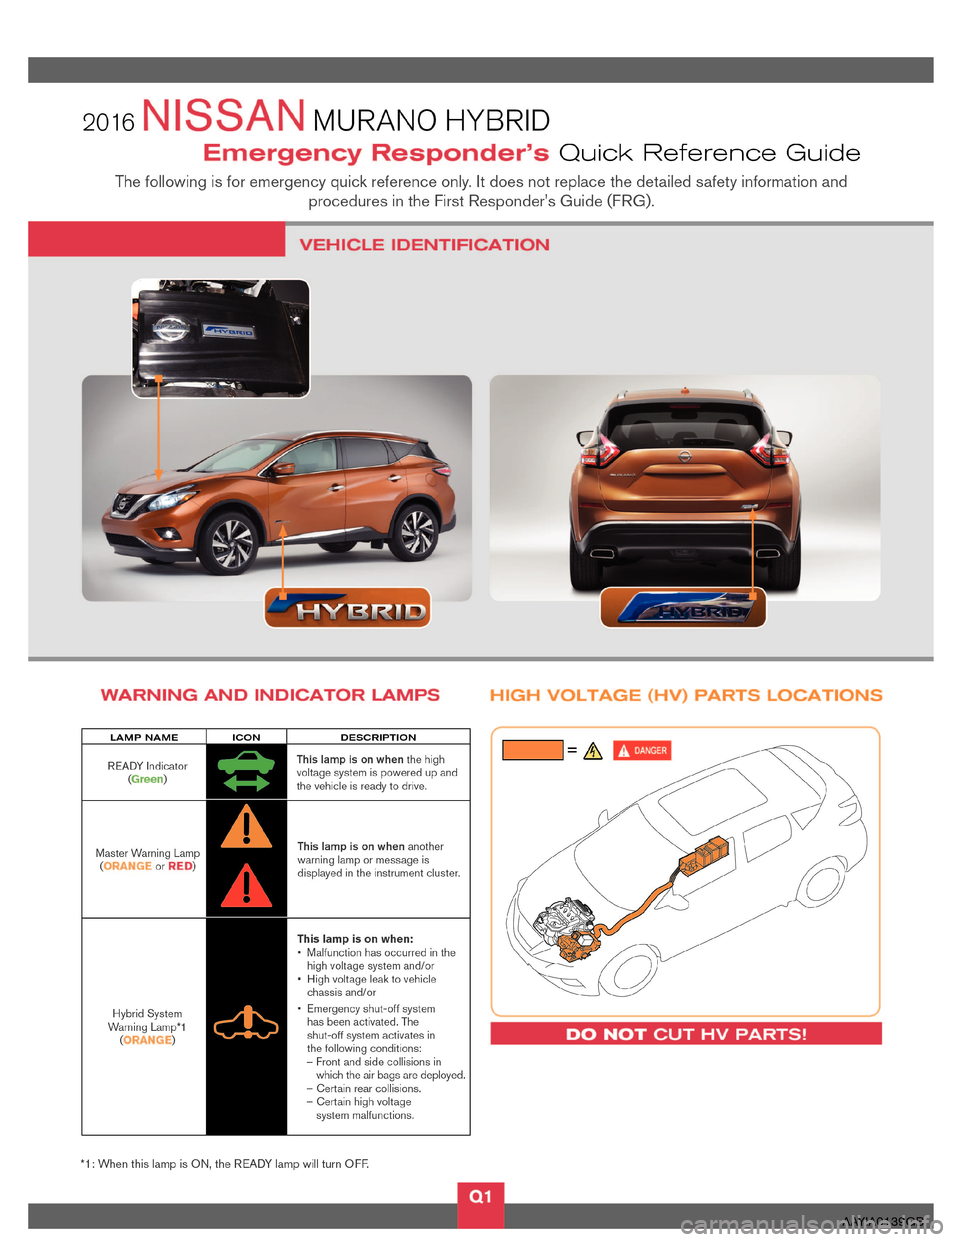 NISSAN MURANO HYBRID 2016 3.G First Responders Guide AAYIA0139GB  